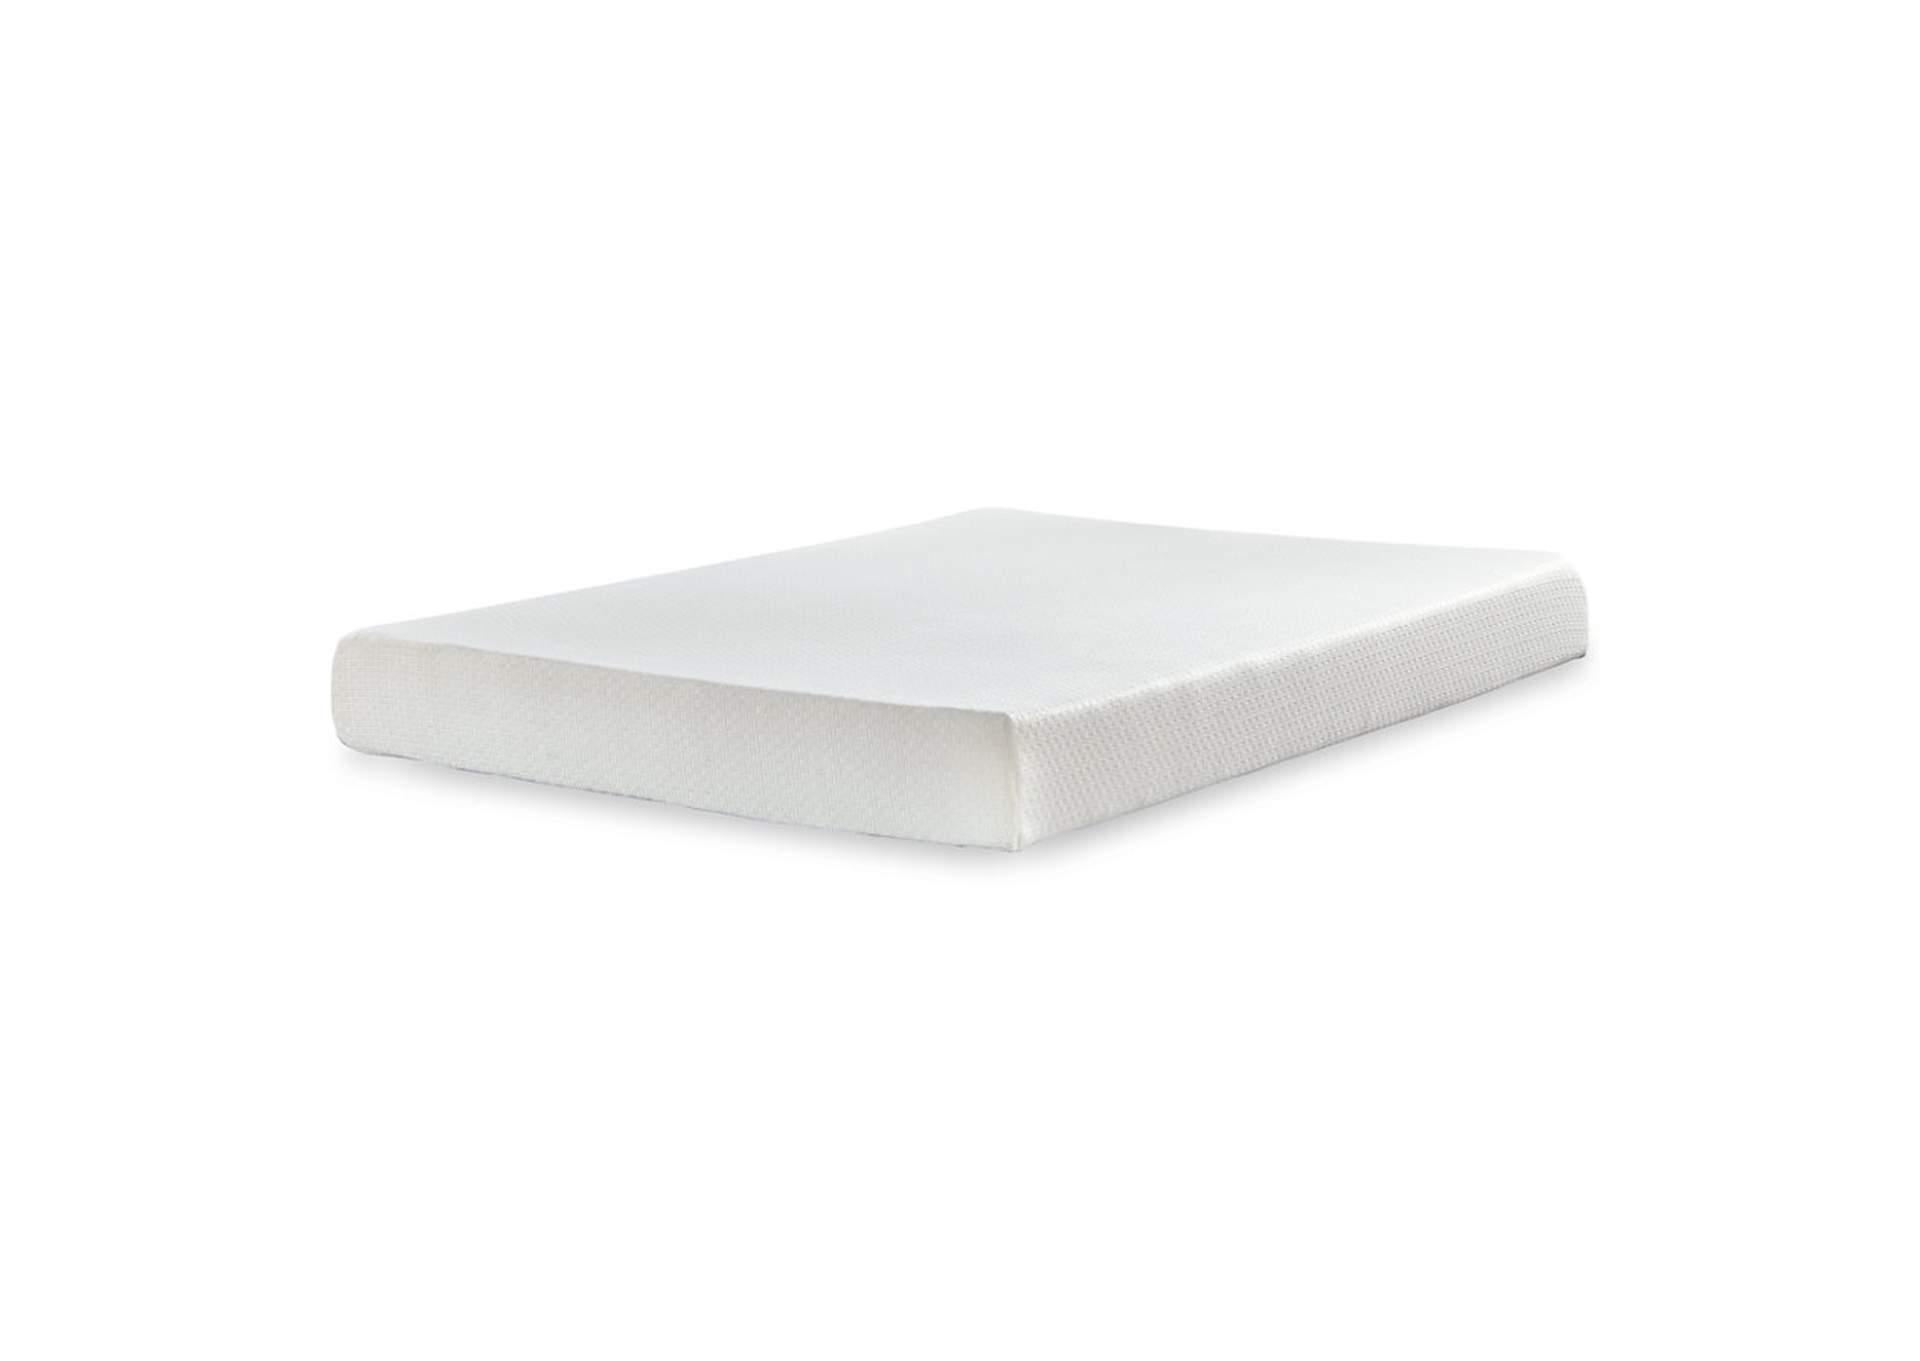 Chime 8 Inch Memory Foam King Mattress in a Box,Direct To Consumer Express